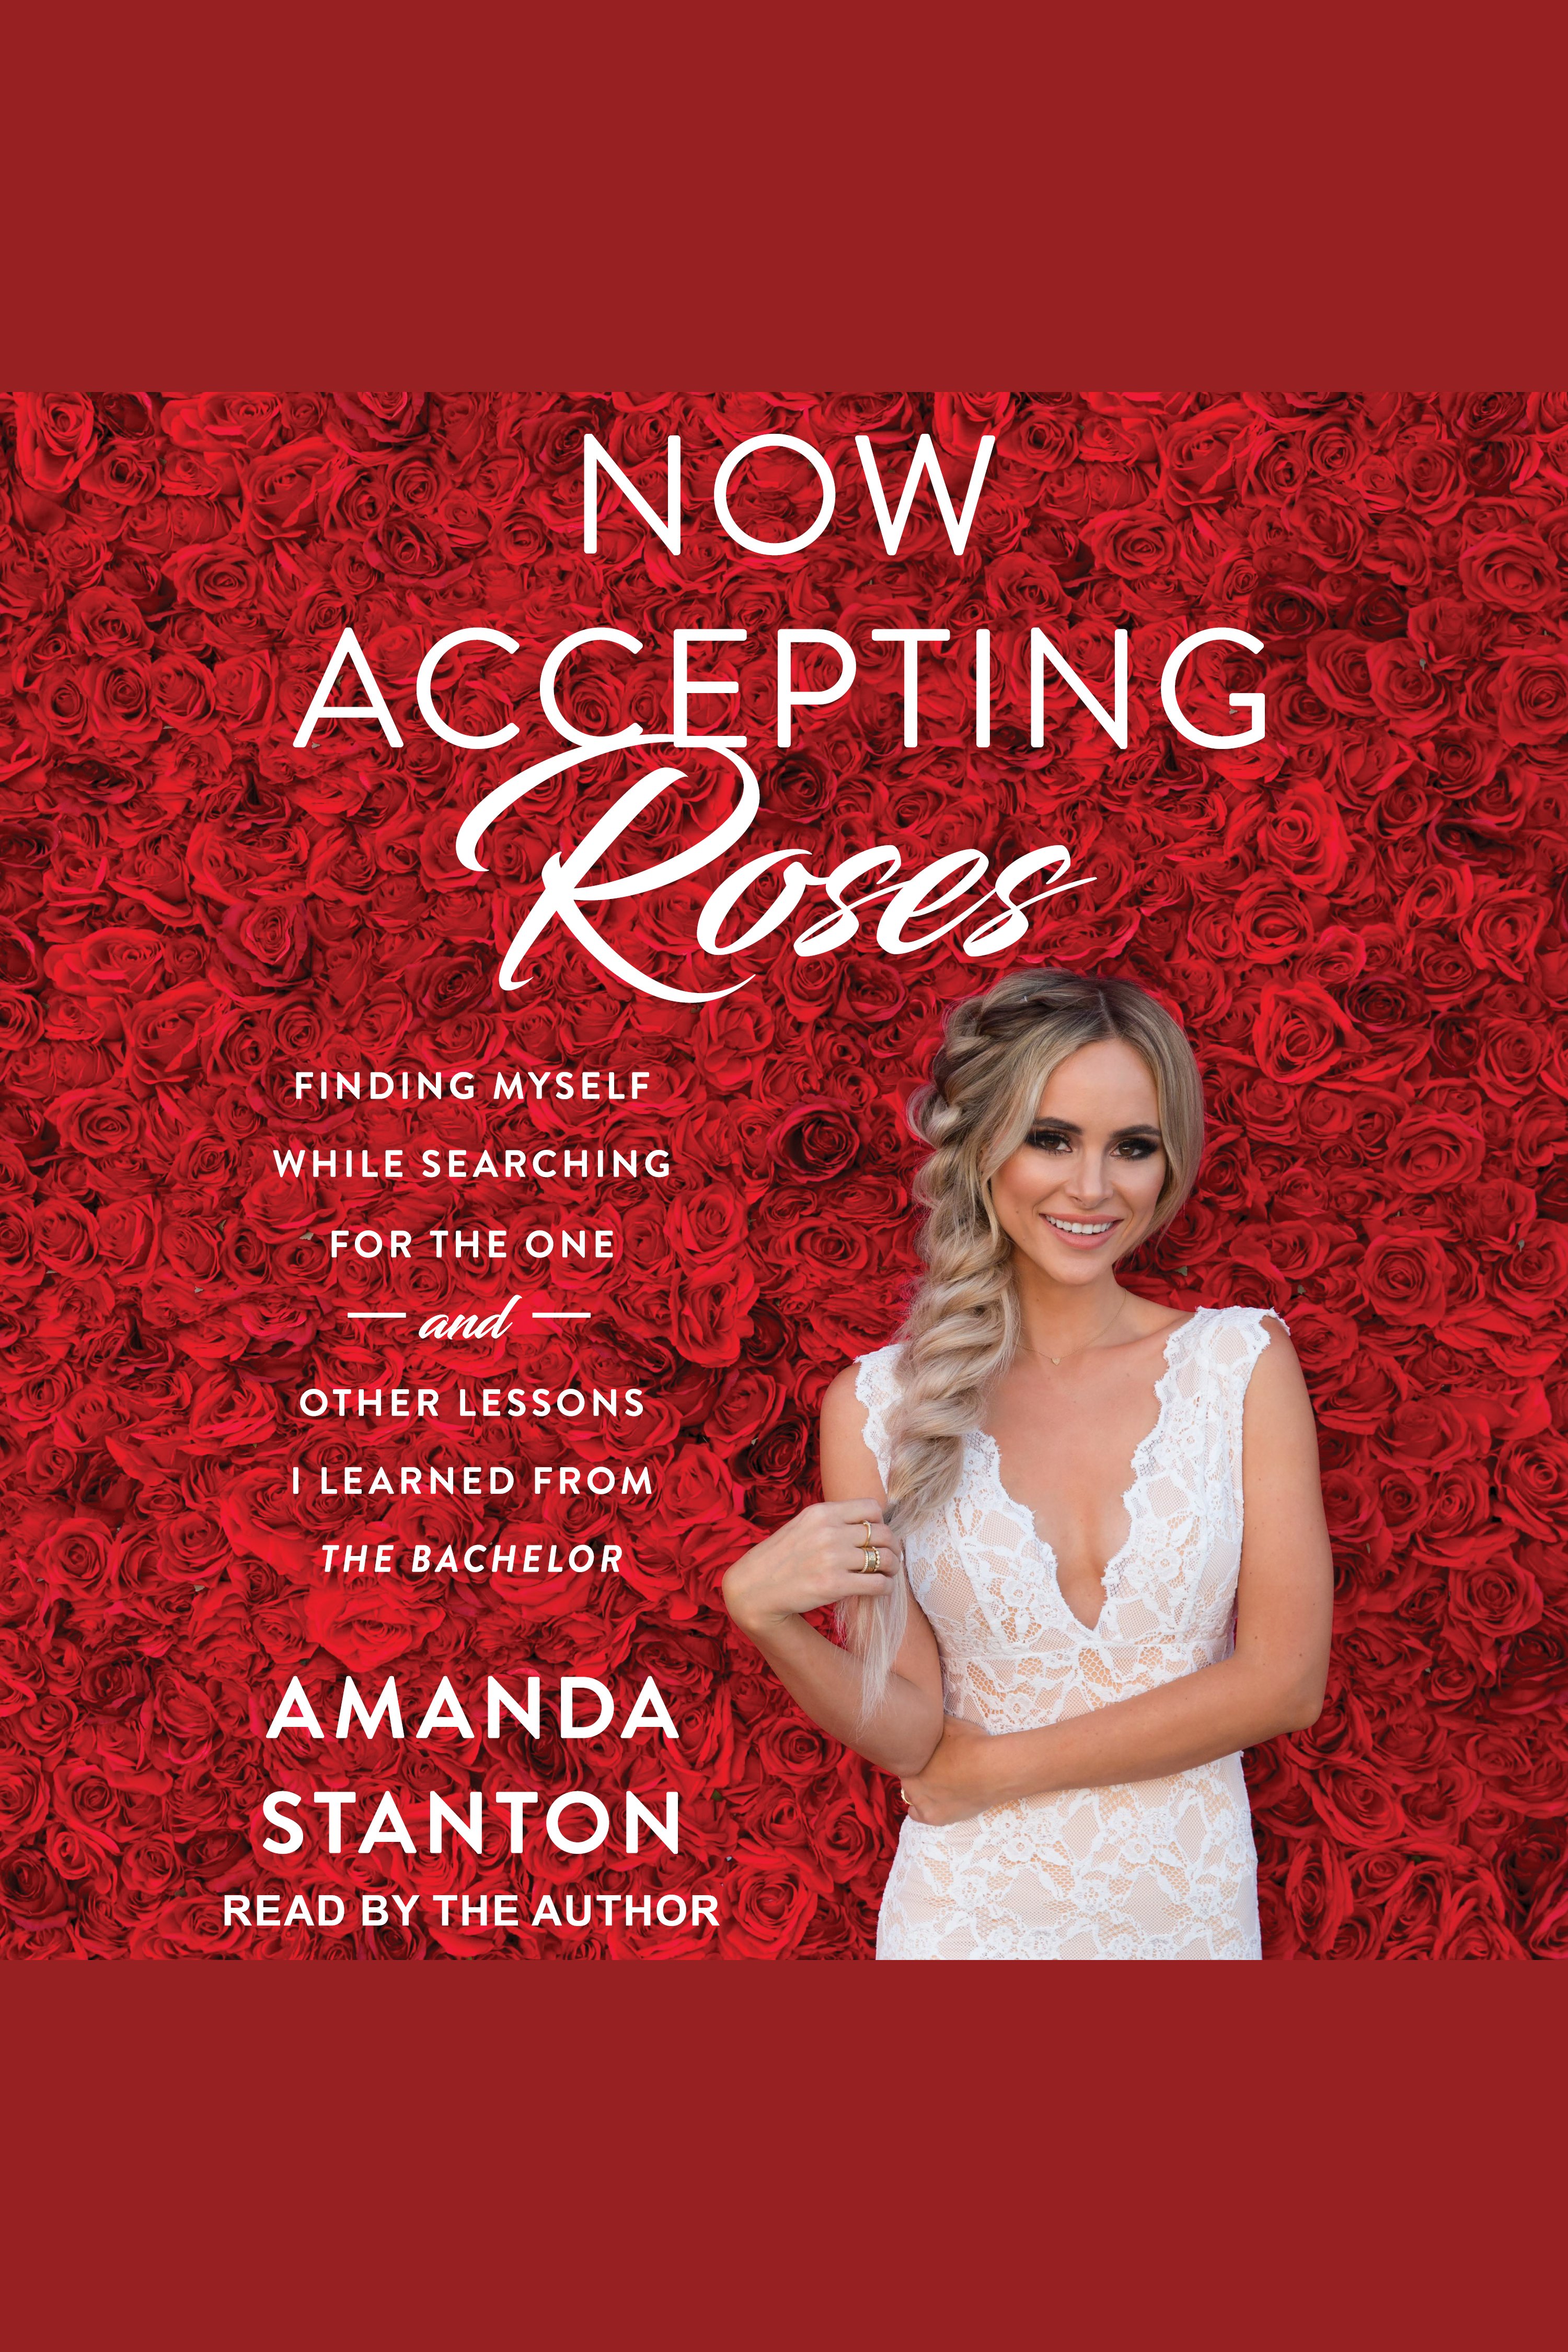 Now accepting roses finding myself while searching for the one... and other lessons I learned from the Bachelor cover image